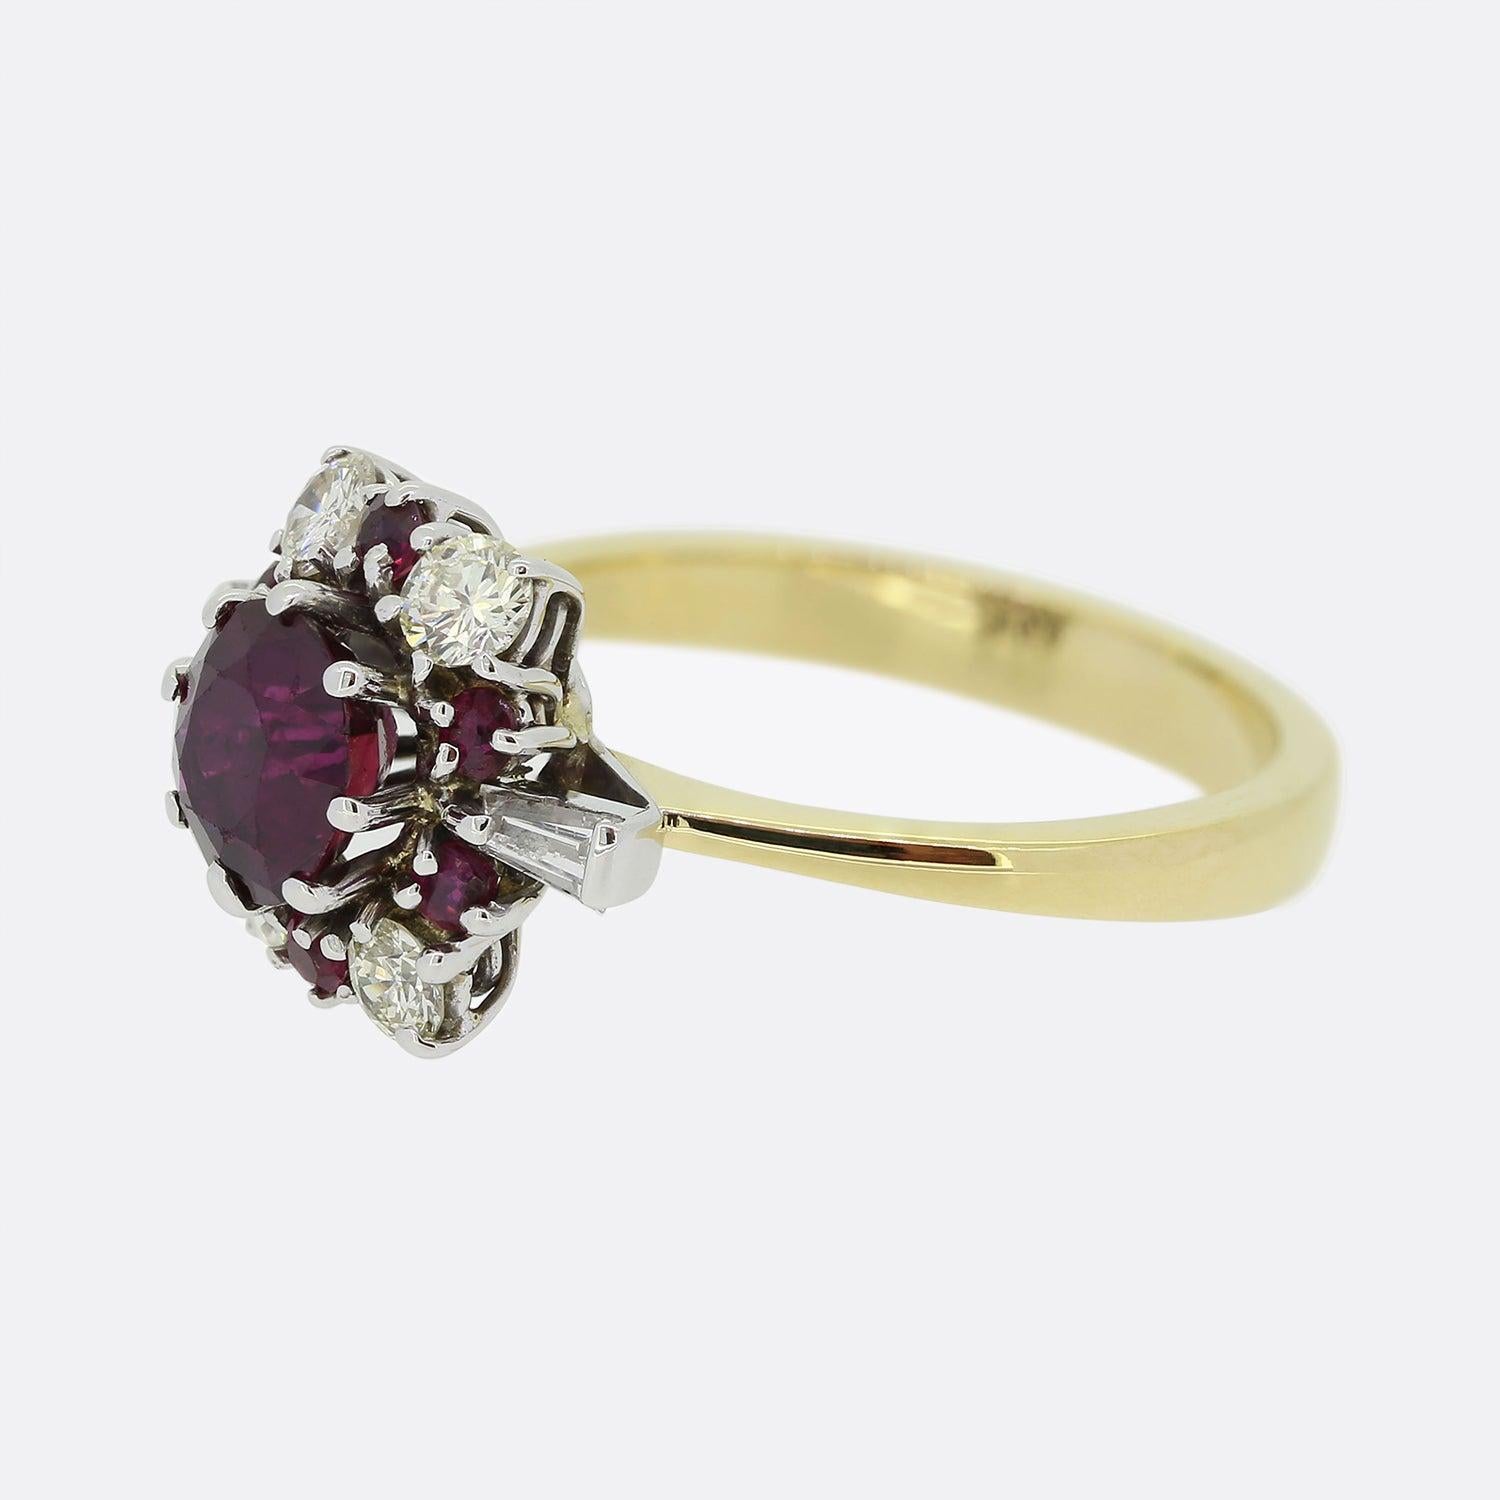 Here we have a vintage ruby and diamond cluster ring. A 1.00ct round ruby possessing a strong rich red colour tone sits slightly risen at the centre and is surrounded by six matching smaller stones and four round brilliant cut diamonds. The piece is